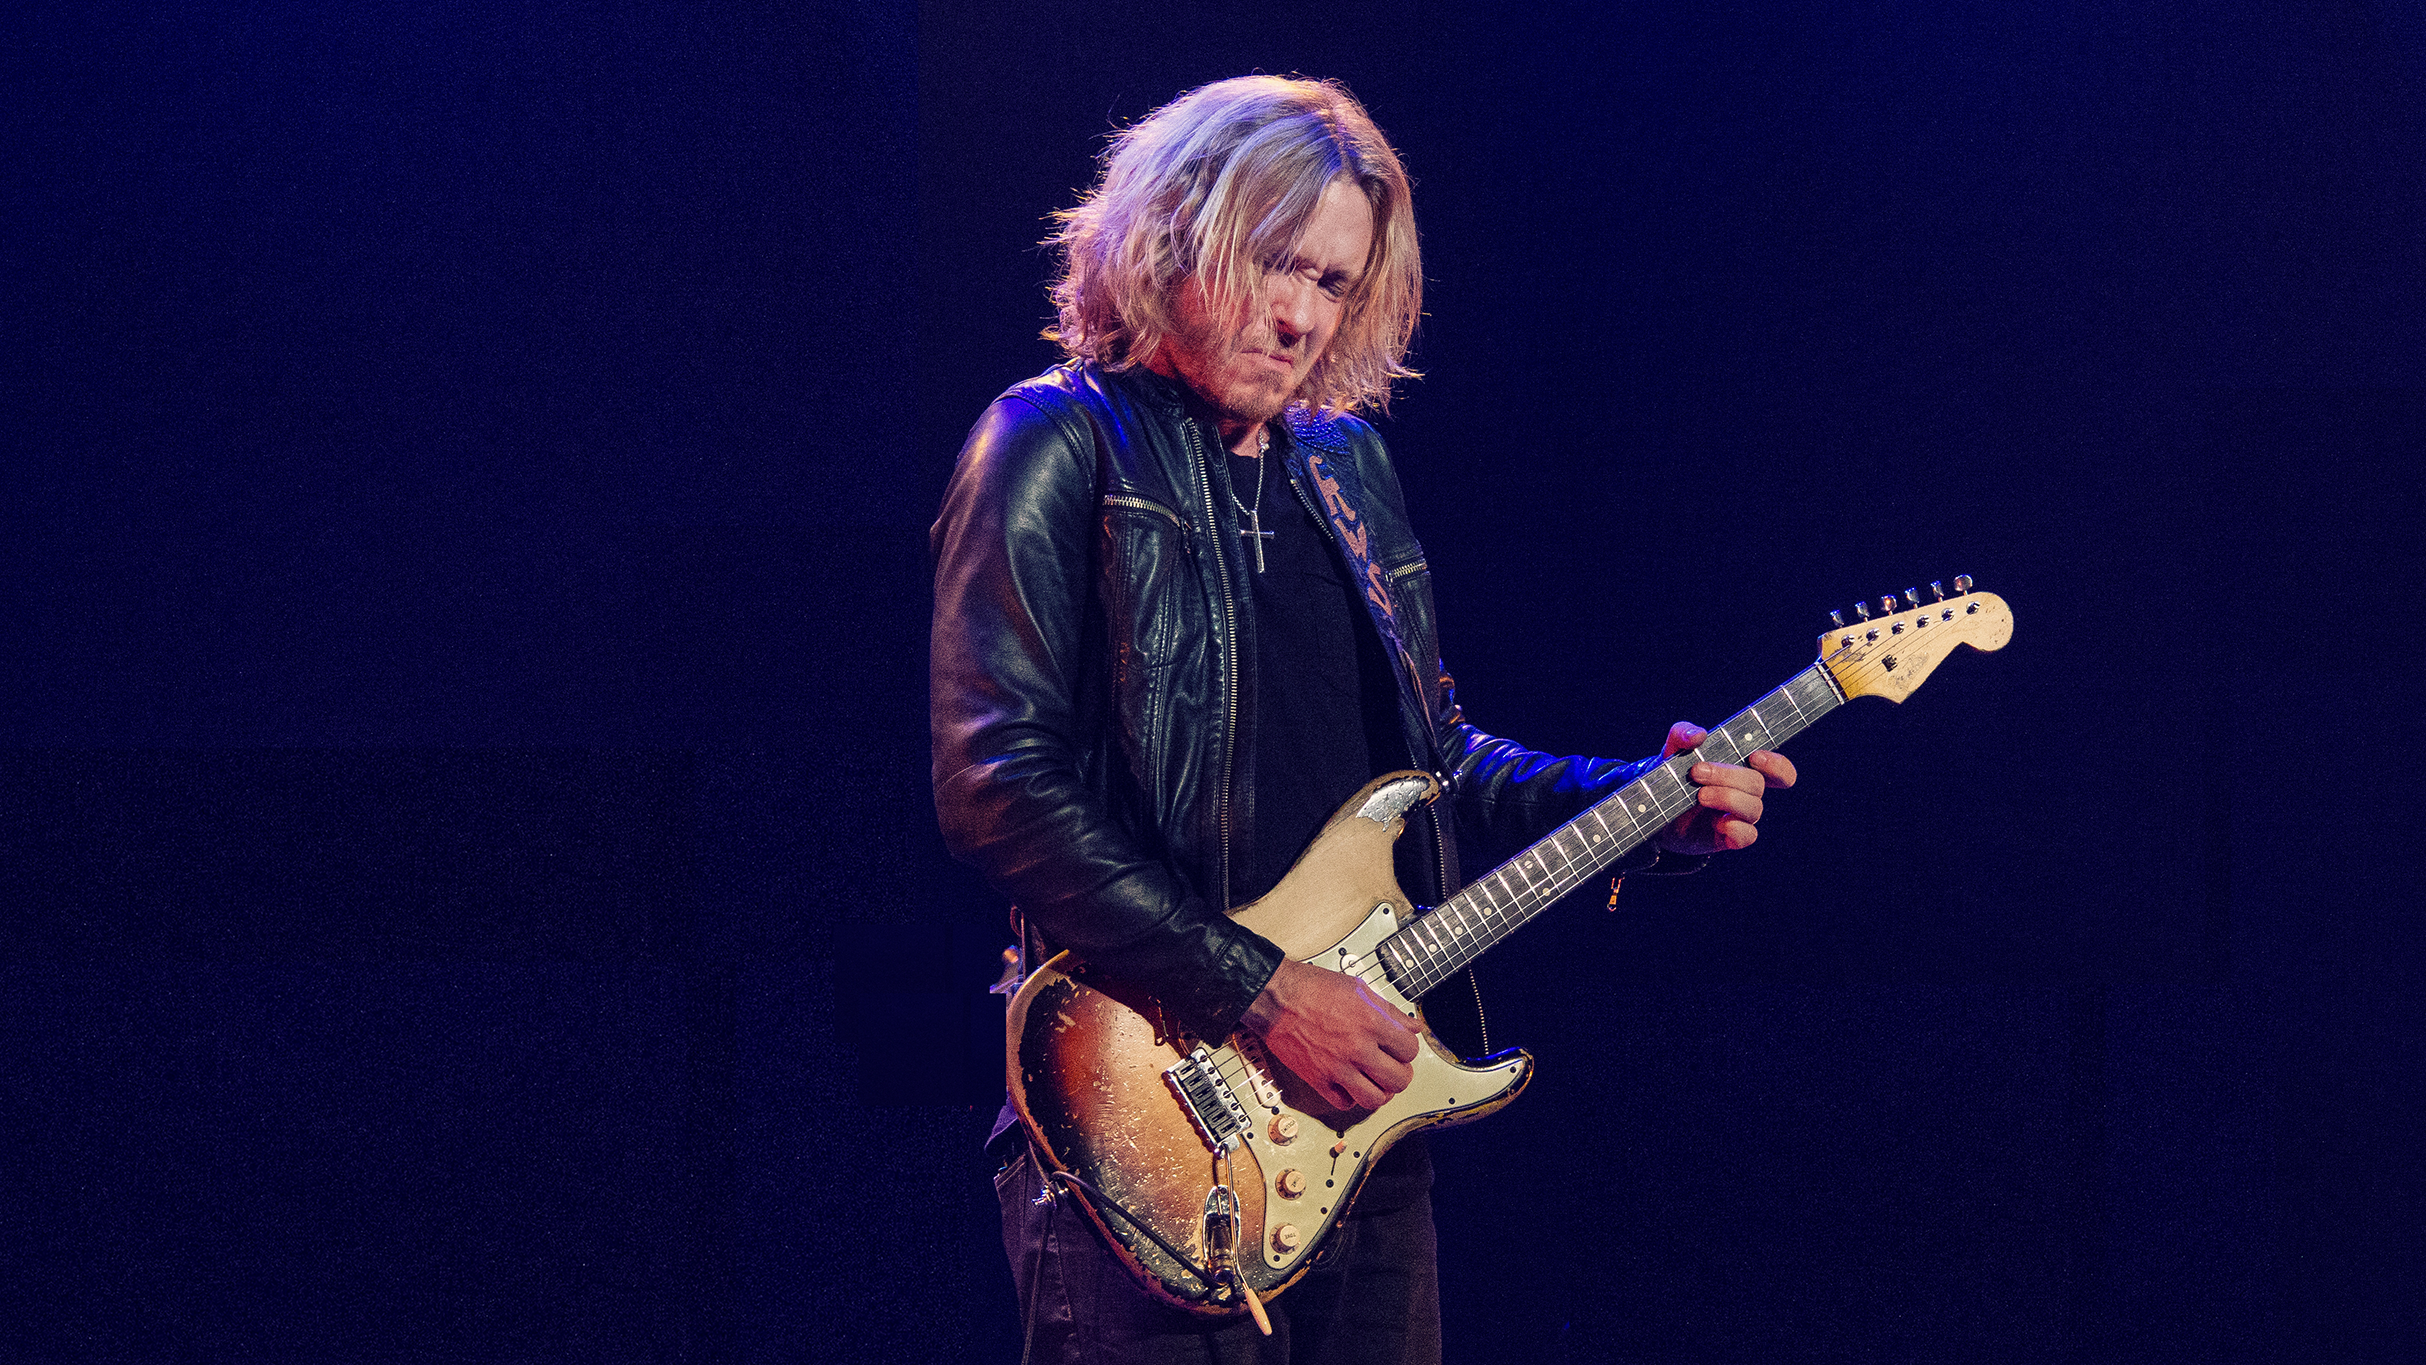 presale password for The Kenny Wayne Shepherd Band affordable tickets in Lawrenceburg